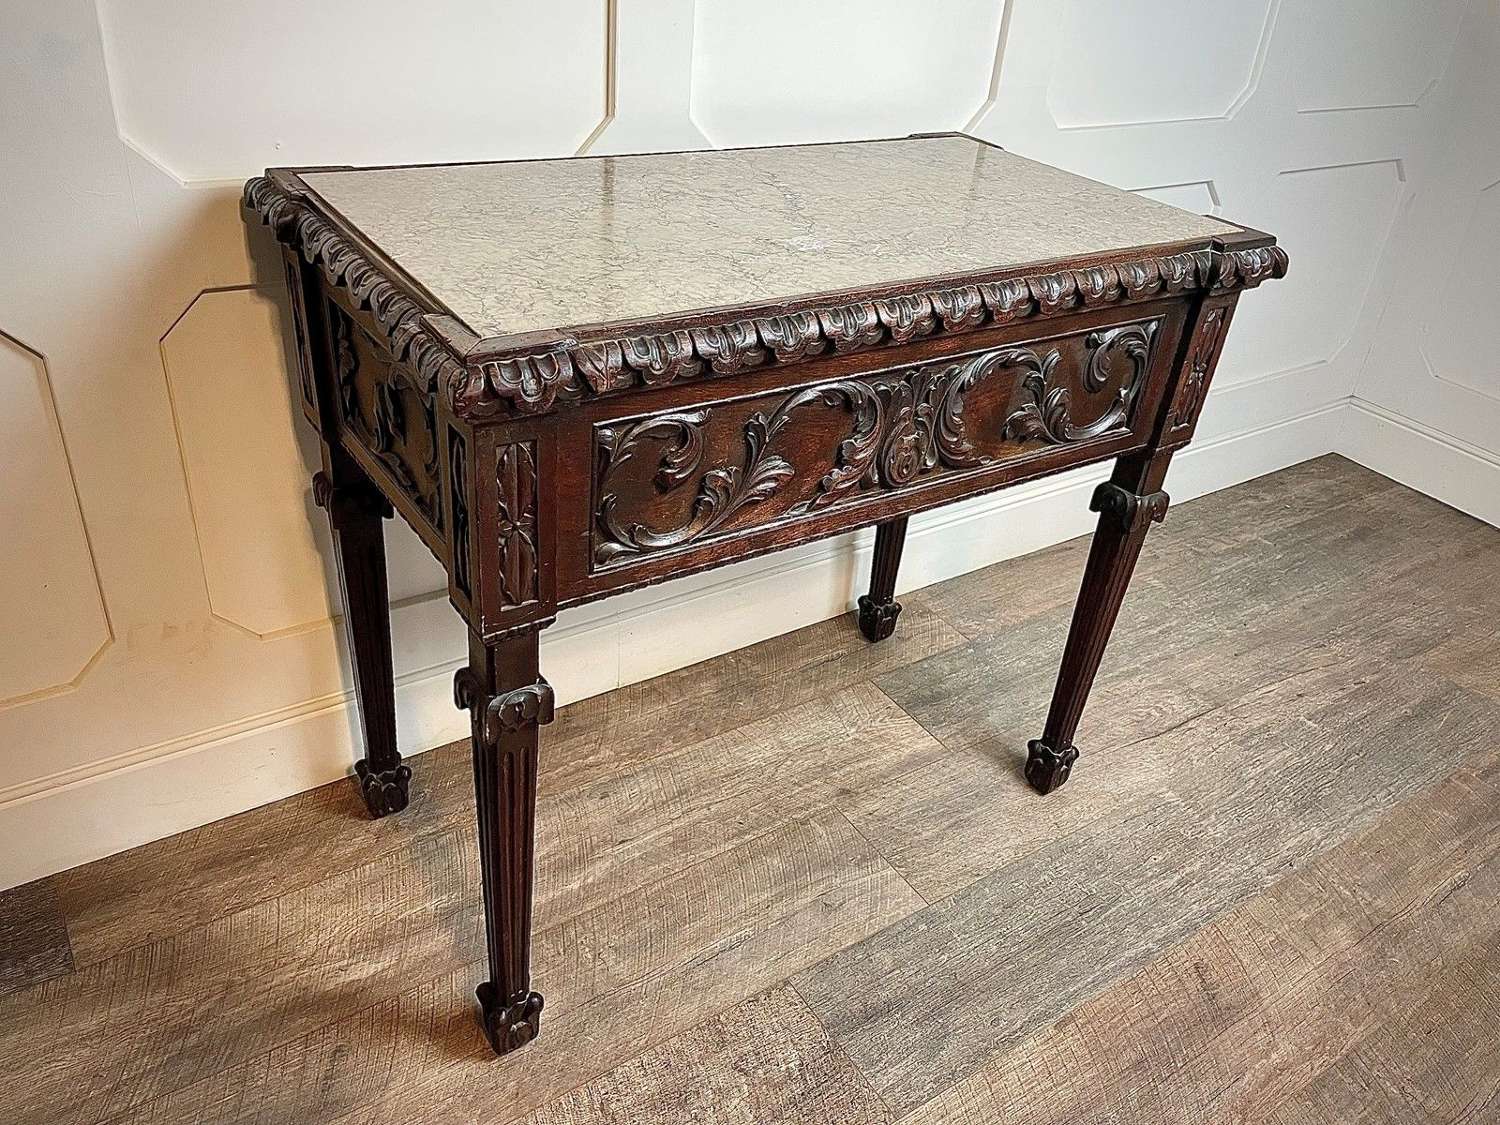 19c Marble topped console